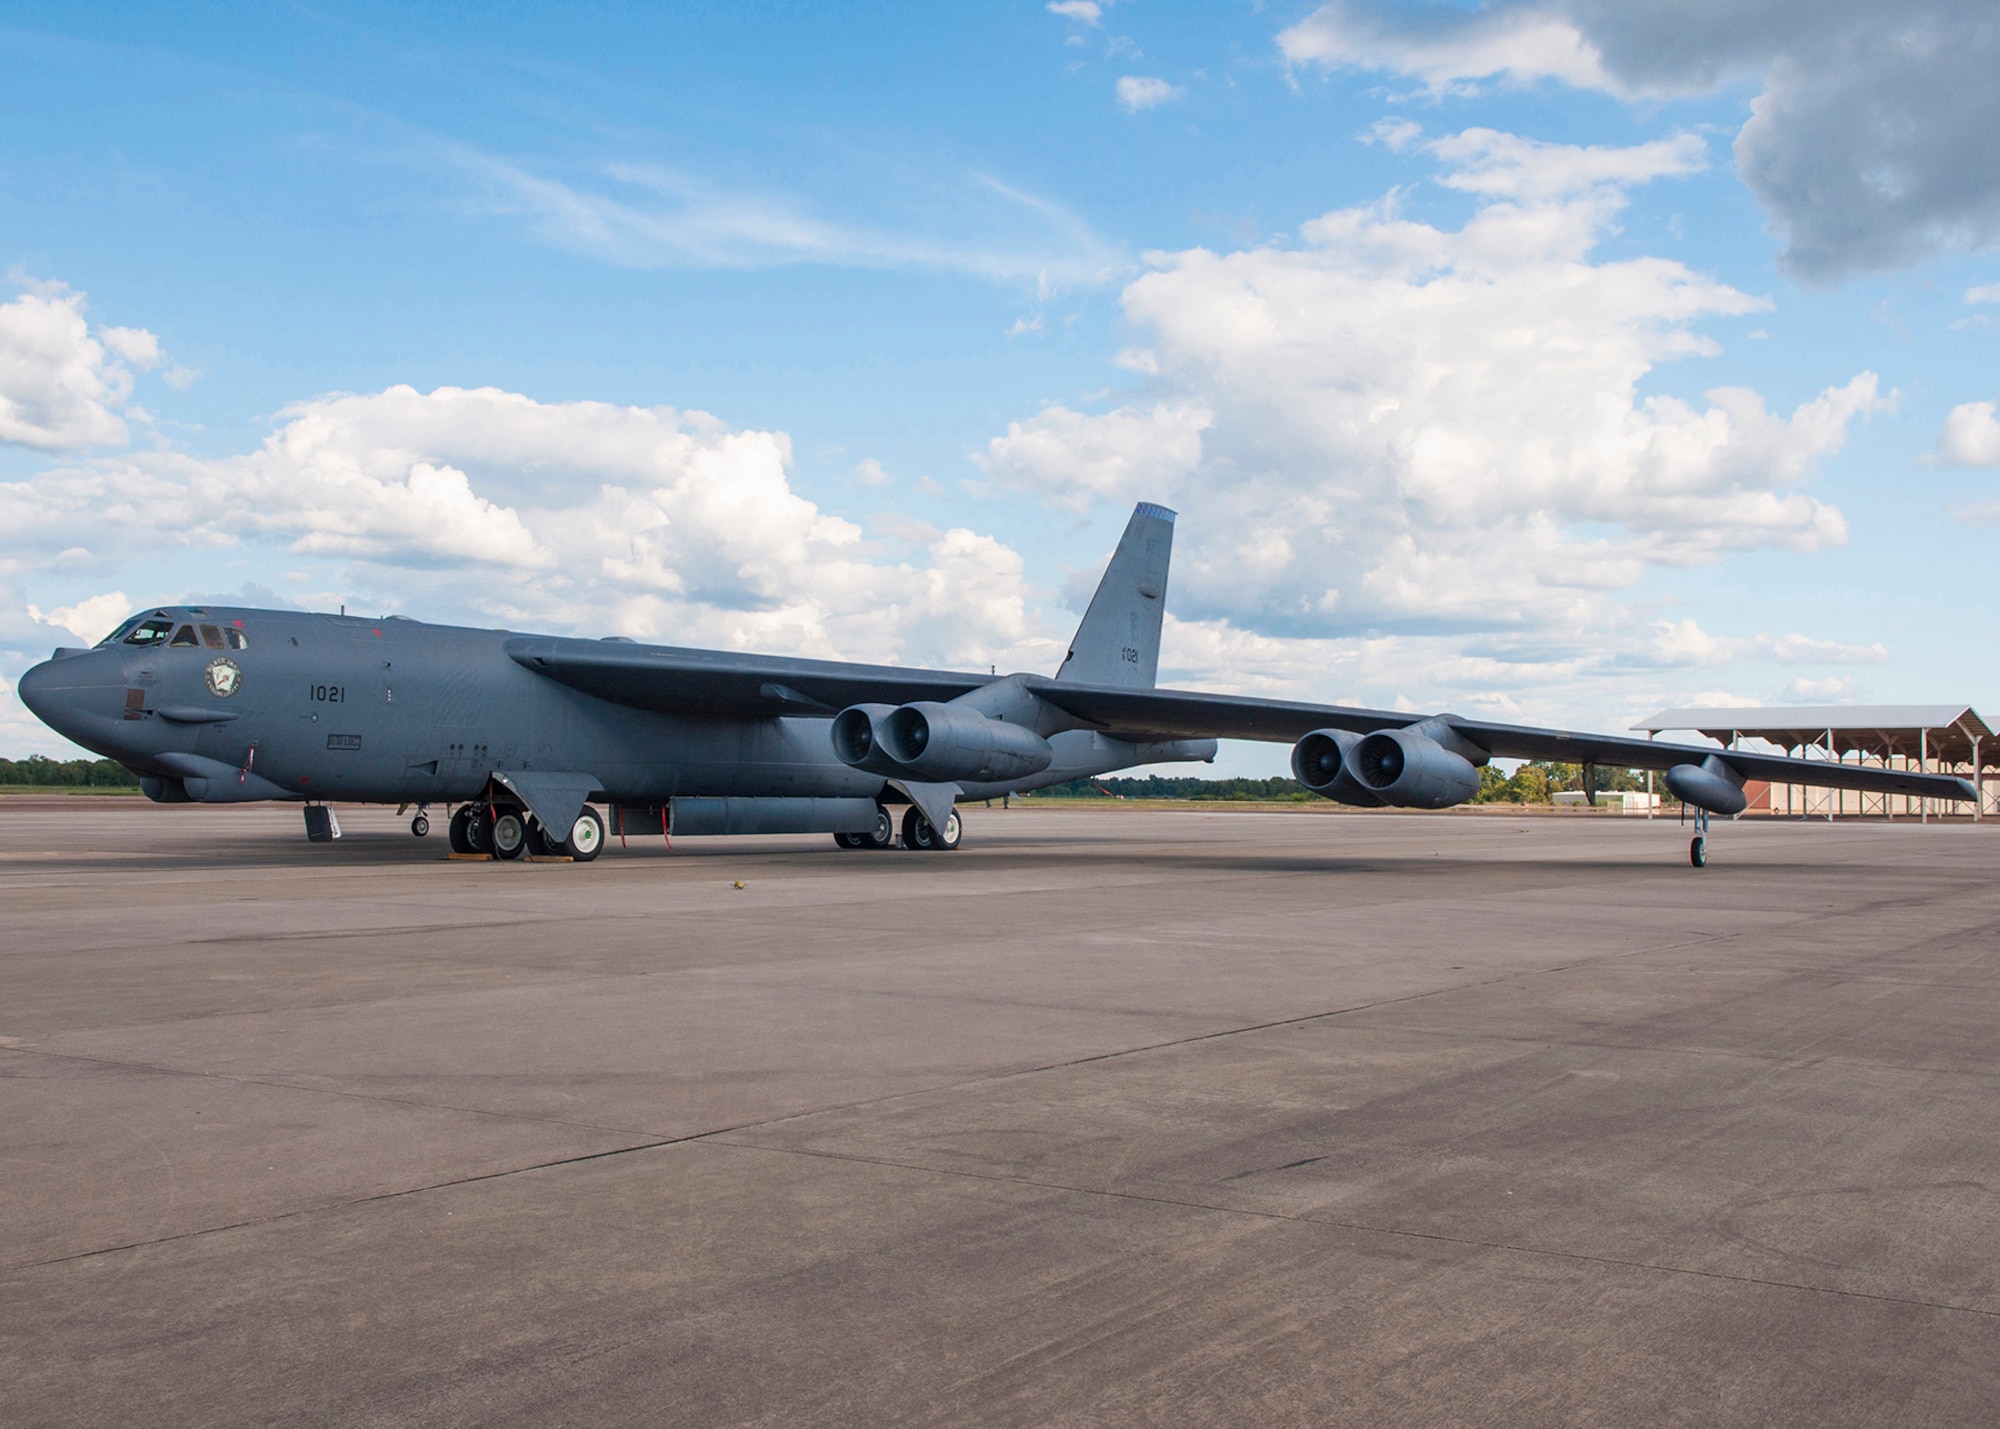 A B-52H Stratofortress assigned to the Air Force Reserve Command's 307th Bomb Wing is the first B-52H bomber to be converted as part of the New START Treaty. U.S. efforts to support the treaty include the conversion of 30 operational and 12 non-operational B-52s to a conventional-only configuration across the Air Force that will be completed by early 2017. (U.S. Air Force photo/Master Sgt. Dachelle Melville)